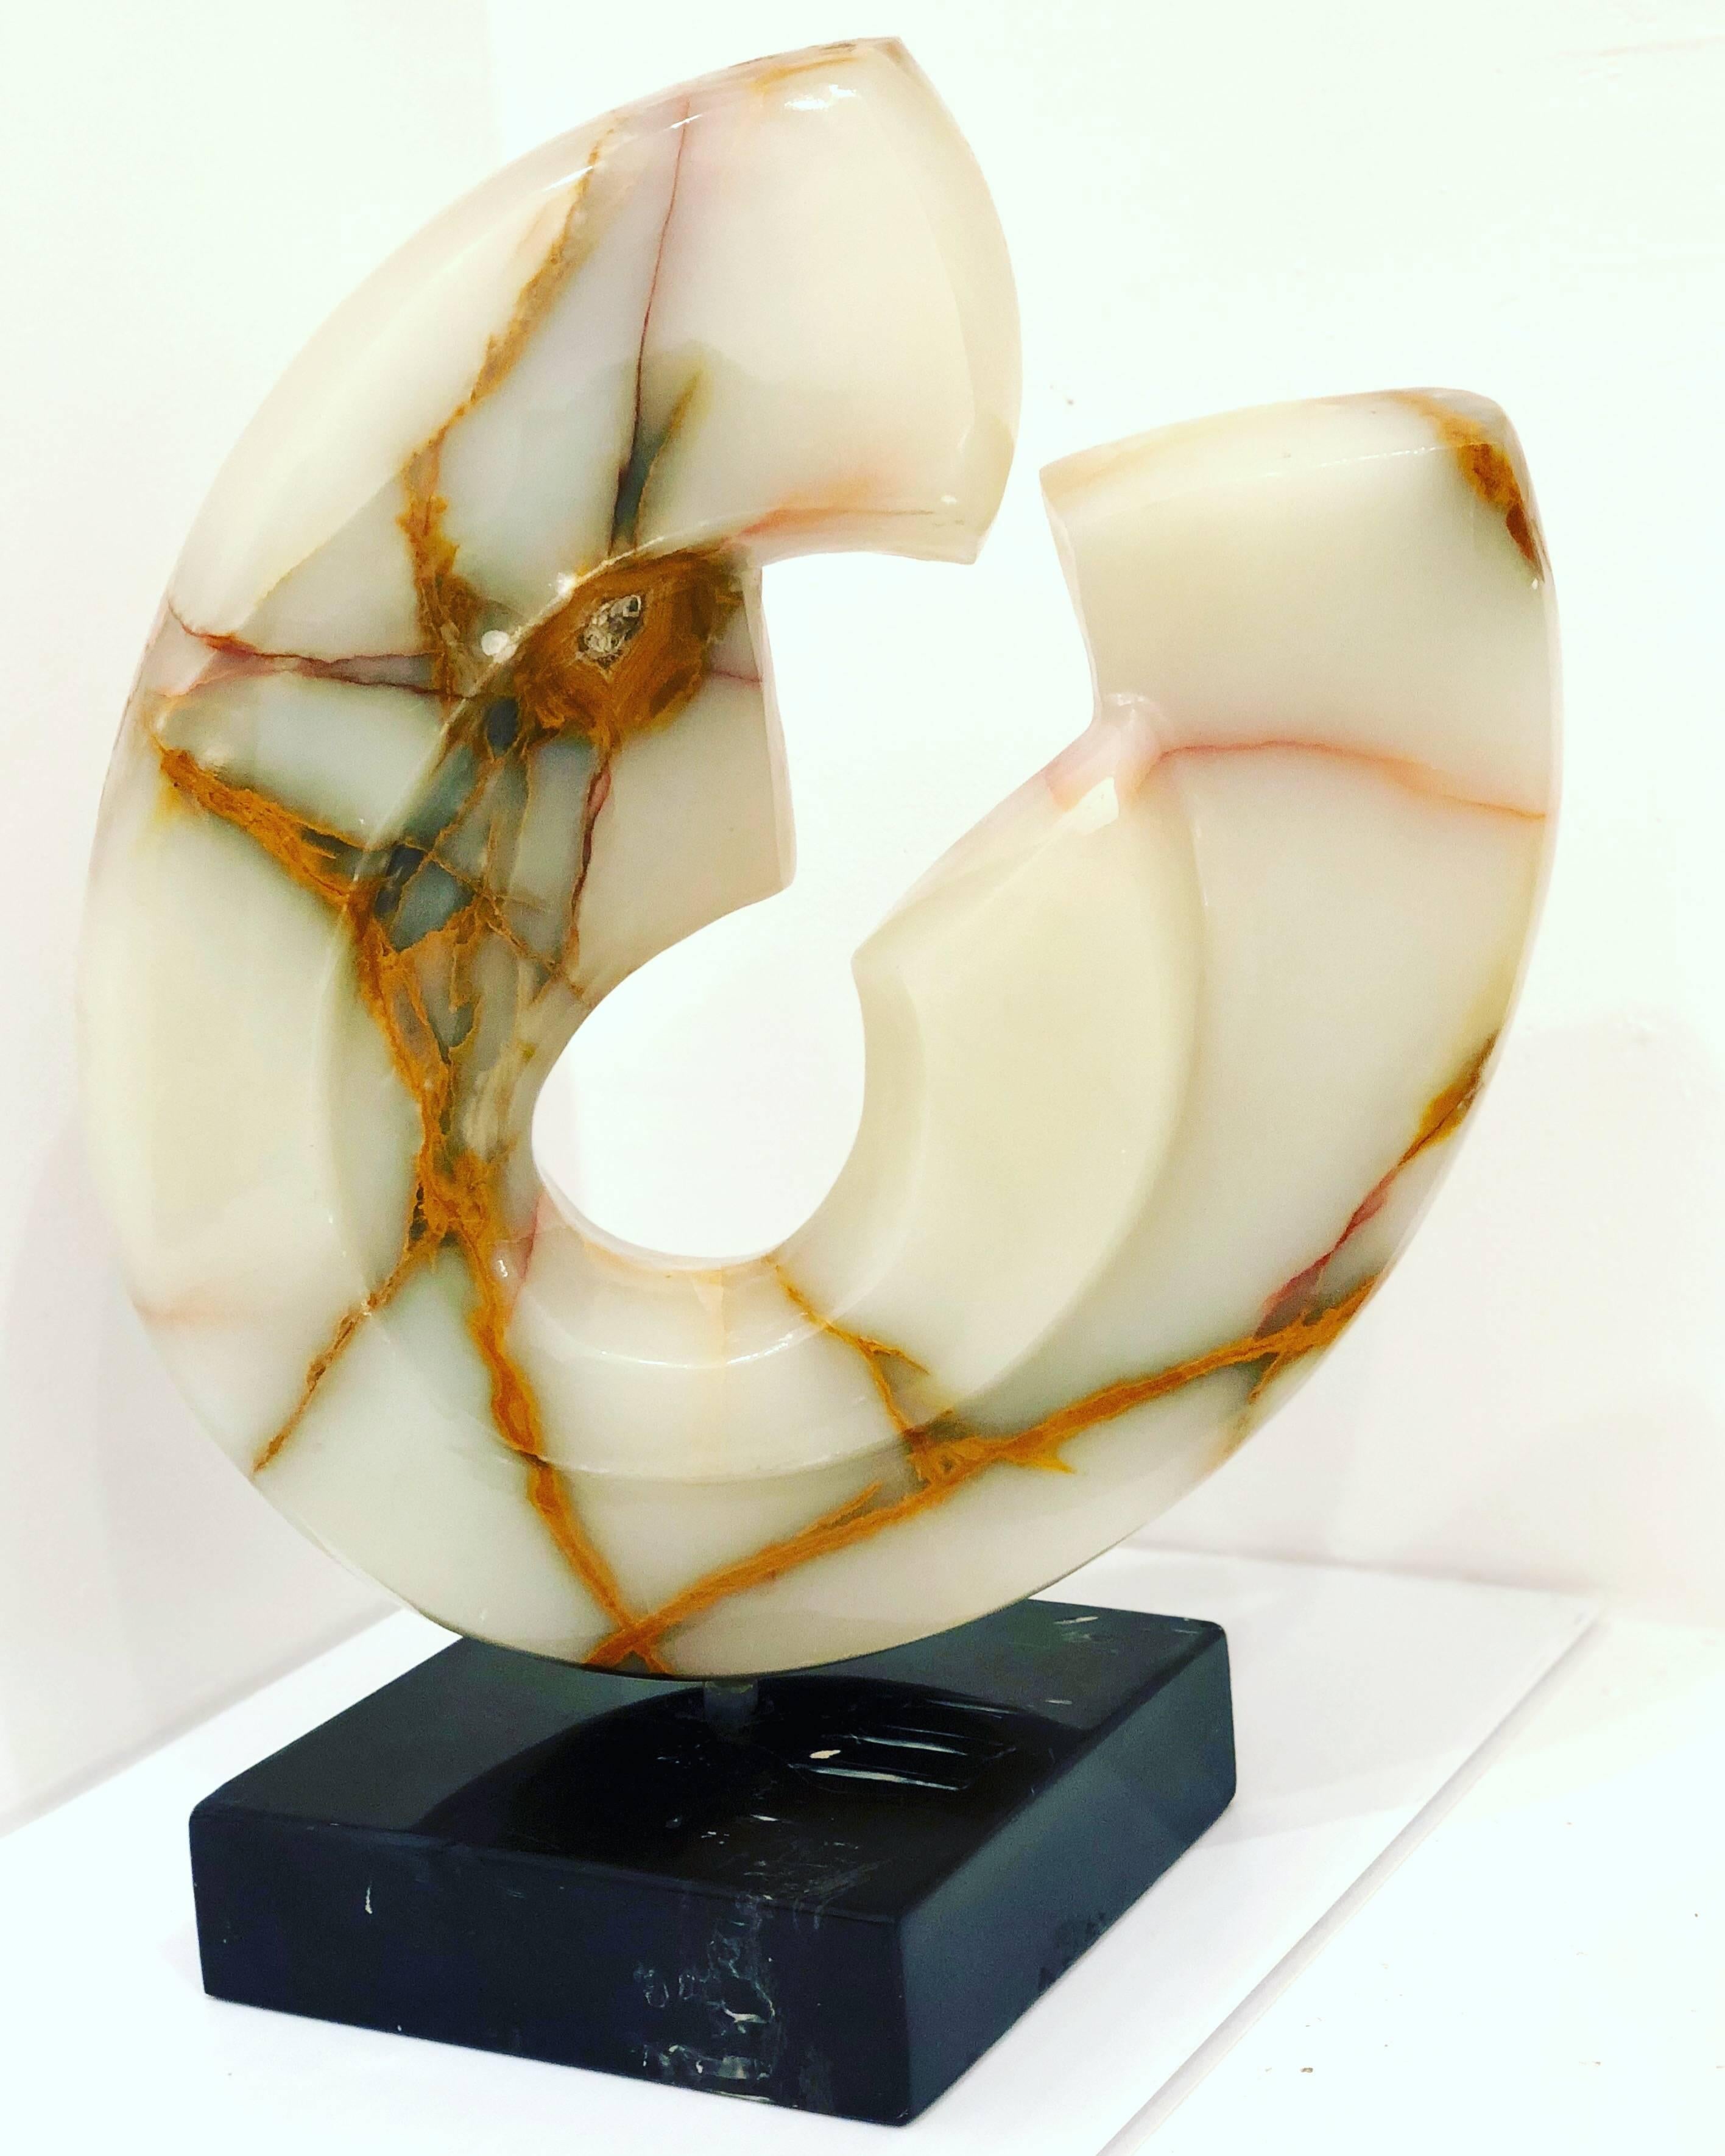 20th Century Modernist Abstract Carved Onyx Sculpture on Black Marble Base